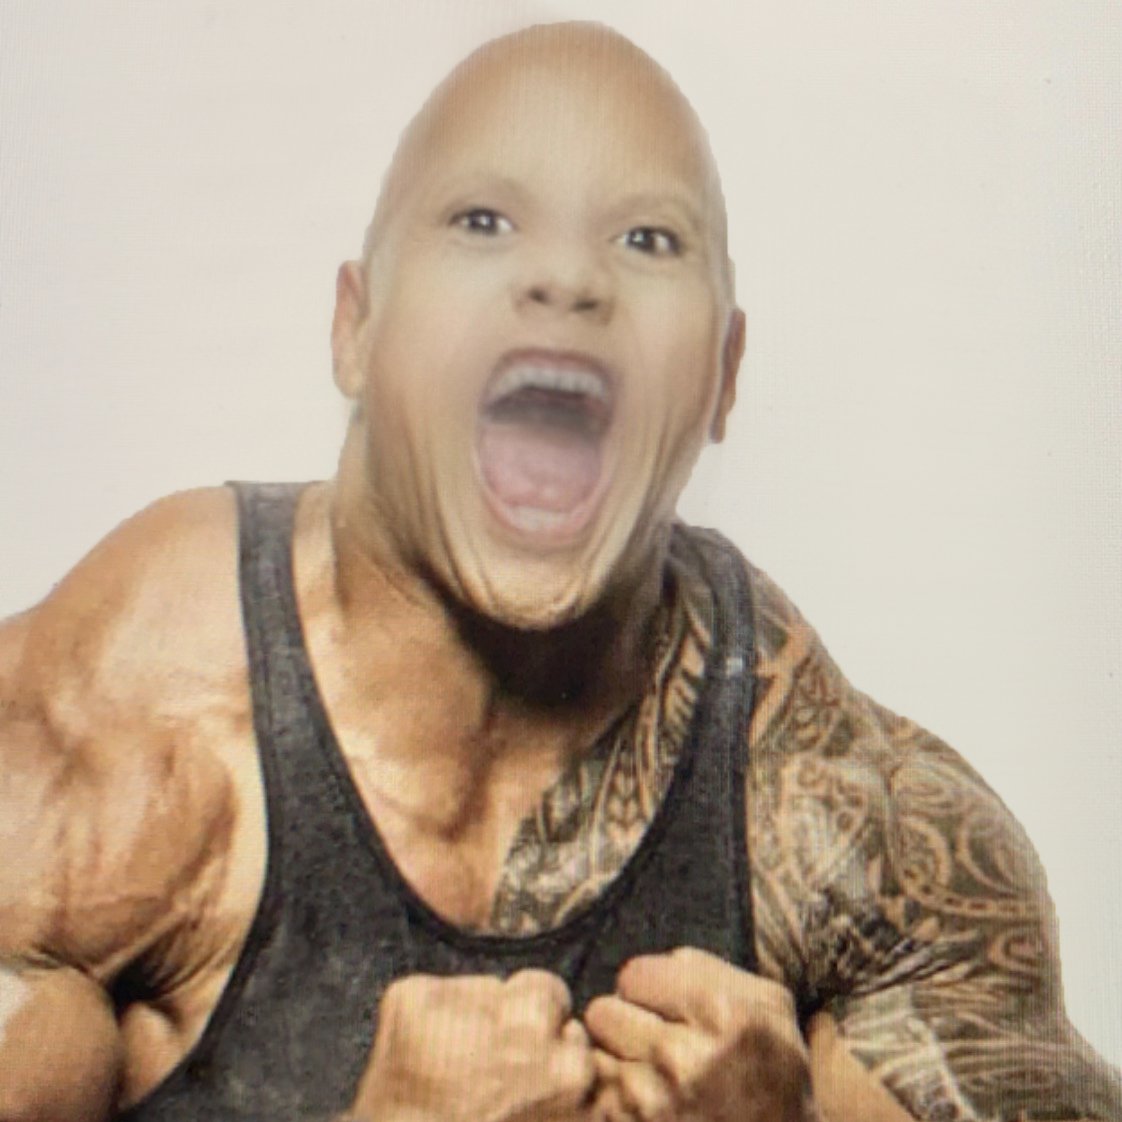 Dwayne Johnson on X: Fanny Pack baby Rock & Peoples Eyebrow Rock are my  favs. Flexing baby Rock looks like Satan's spawn. #smackdownsincebirth / X